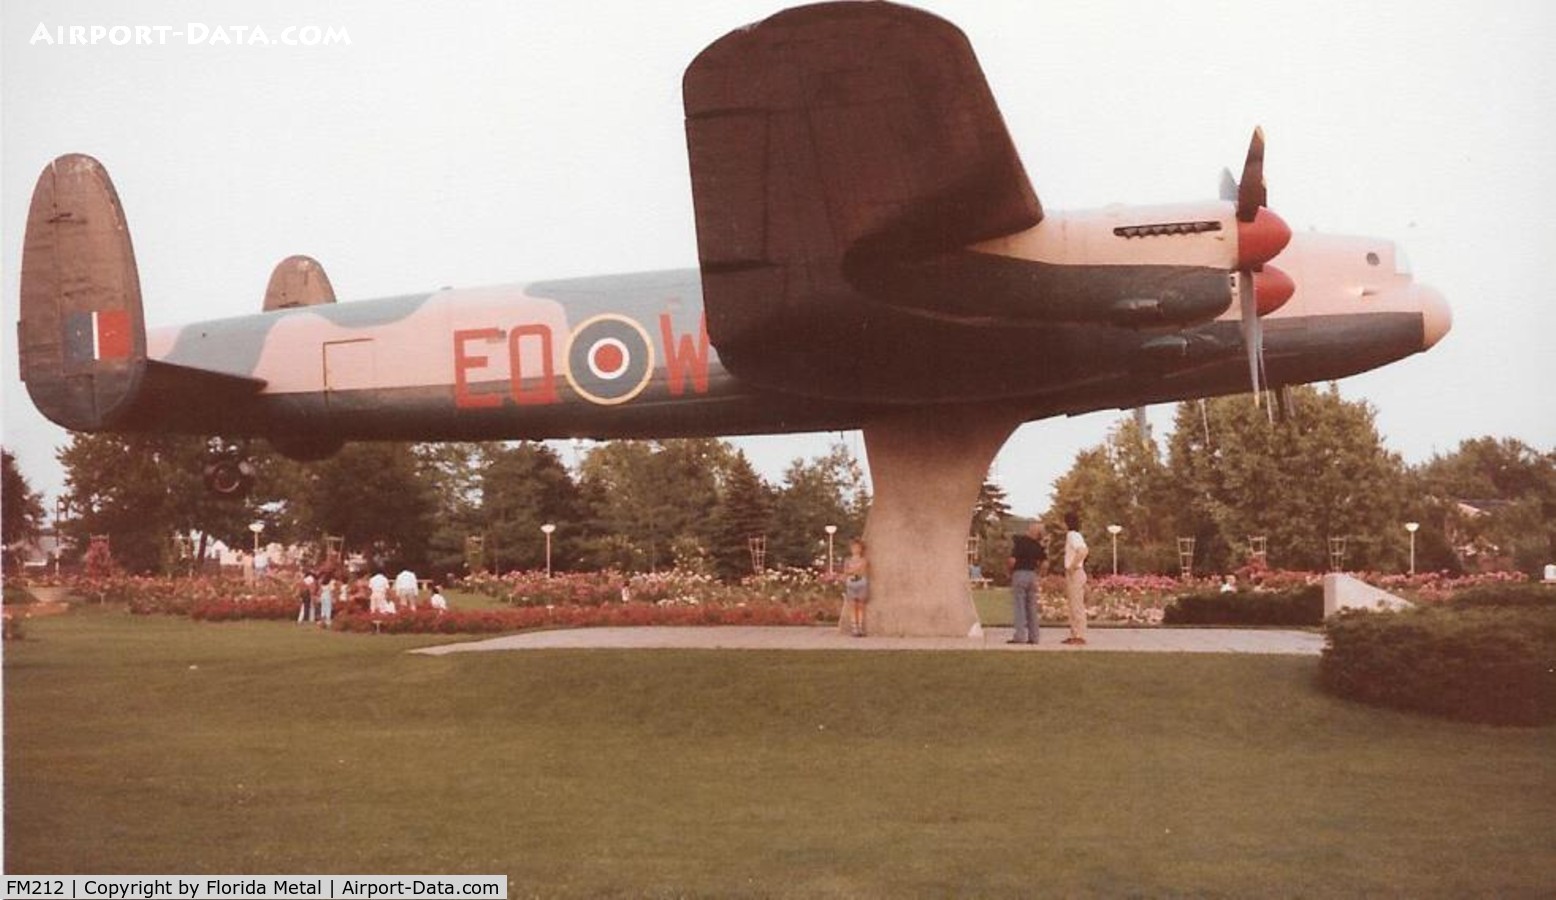 FM212, 1944 Avro 683 Lancaster B10 C/N Not found FM212, Avro Lancaster B10 at Jackson Park Windsor Ontario. Currently at Windsor Airport being restored.  This was taken circa 1983 by my grandfather Louis Dzialo